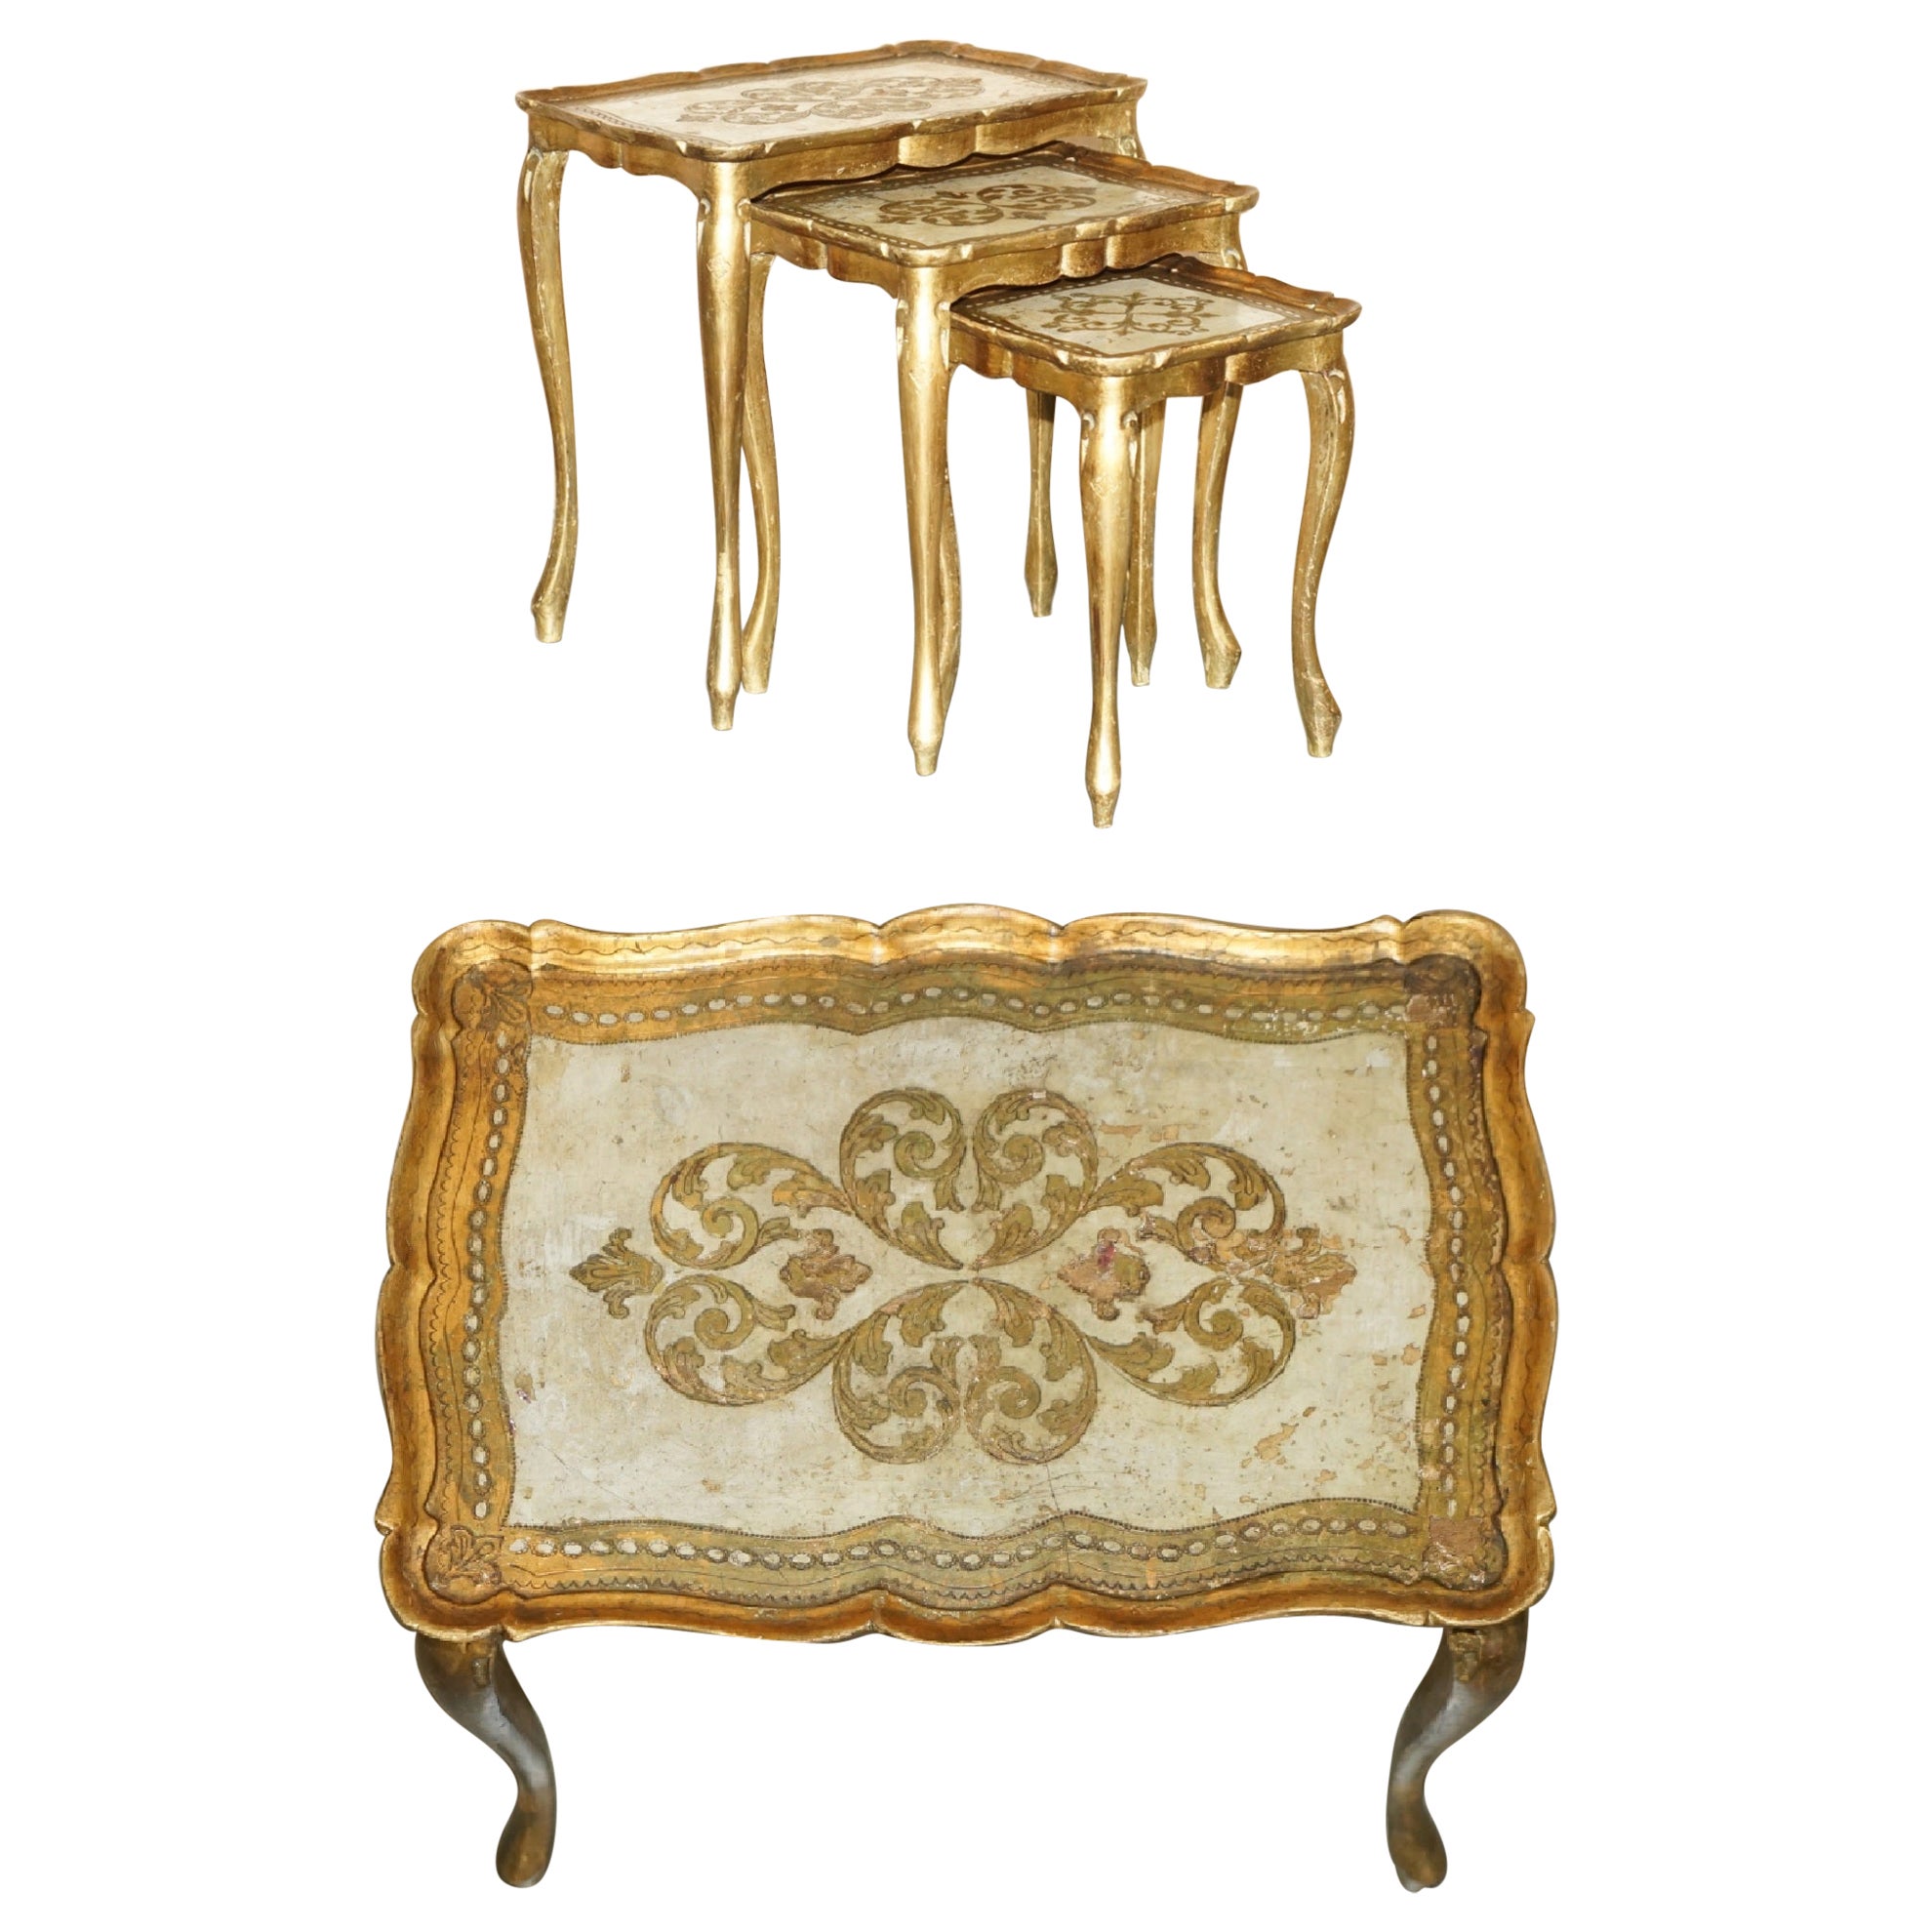 ANTIQUE CIRCA 1930 FLORENTINE VENETIAN HAND PAiNTED & GILT NEST OF THREE TABLES For Sale